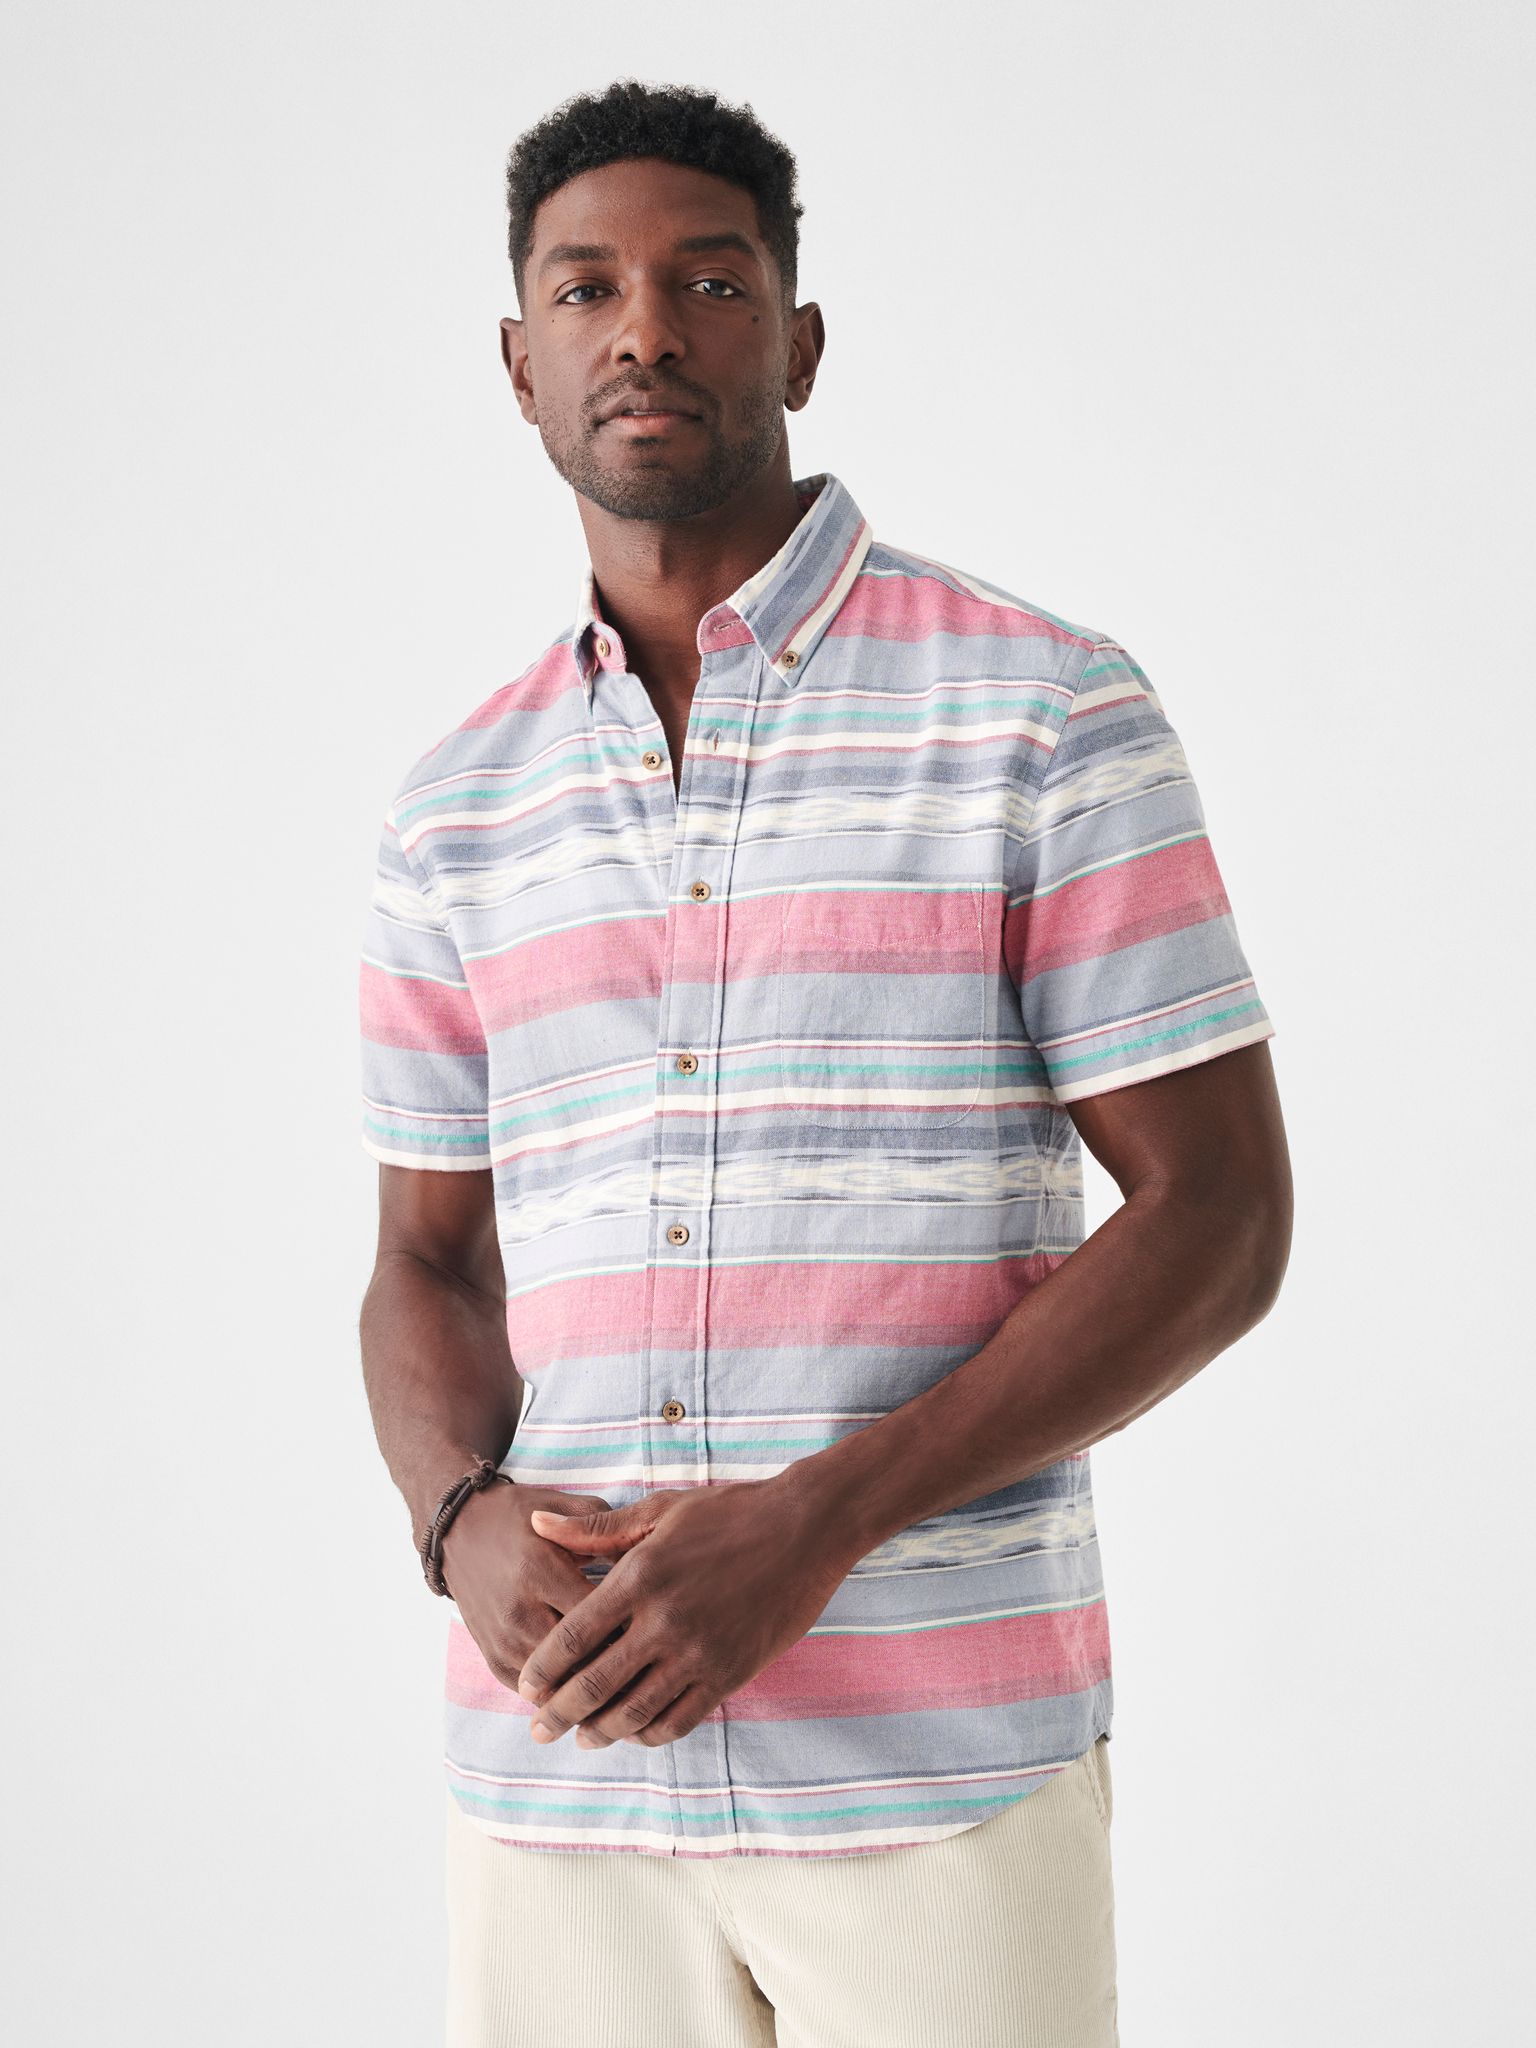 mulitcolored short sleeve patterned shirt from Faherty